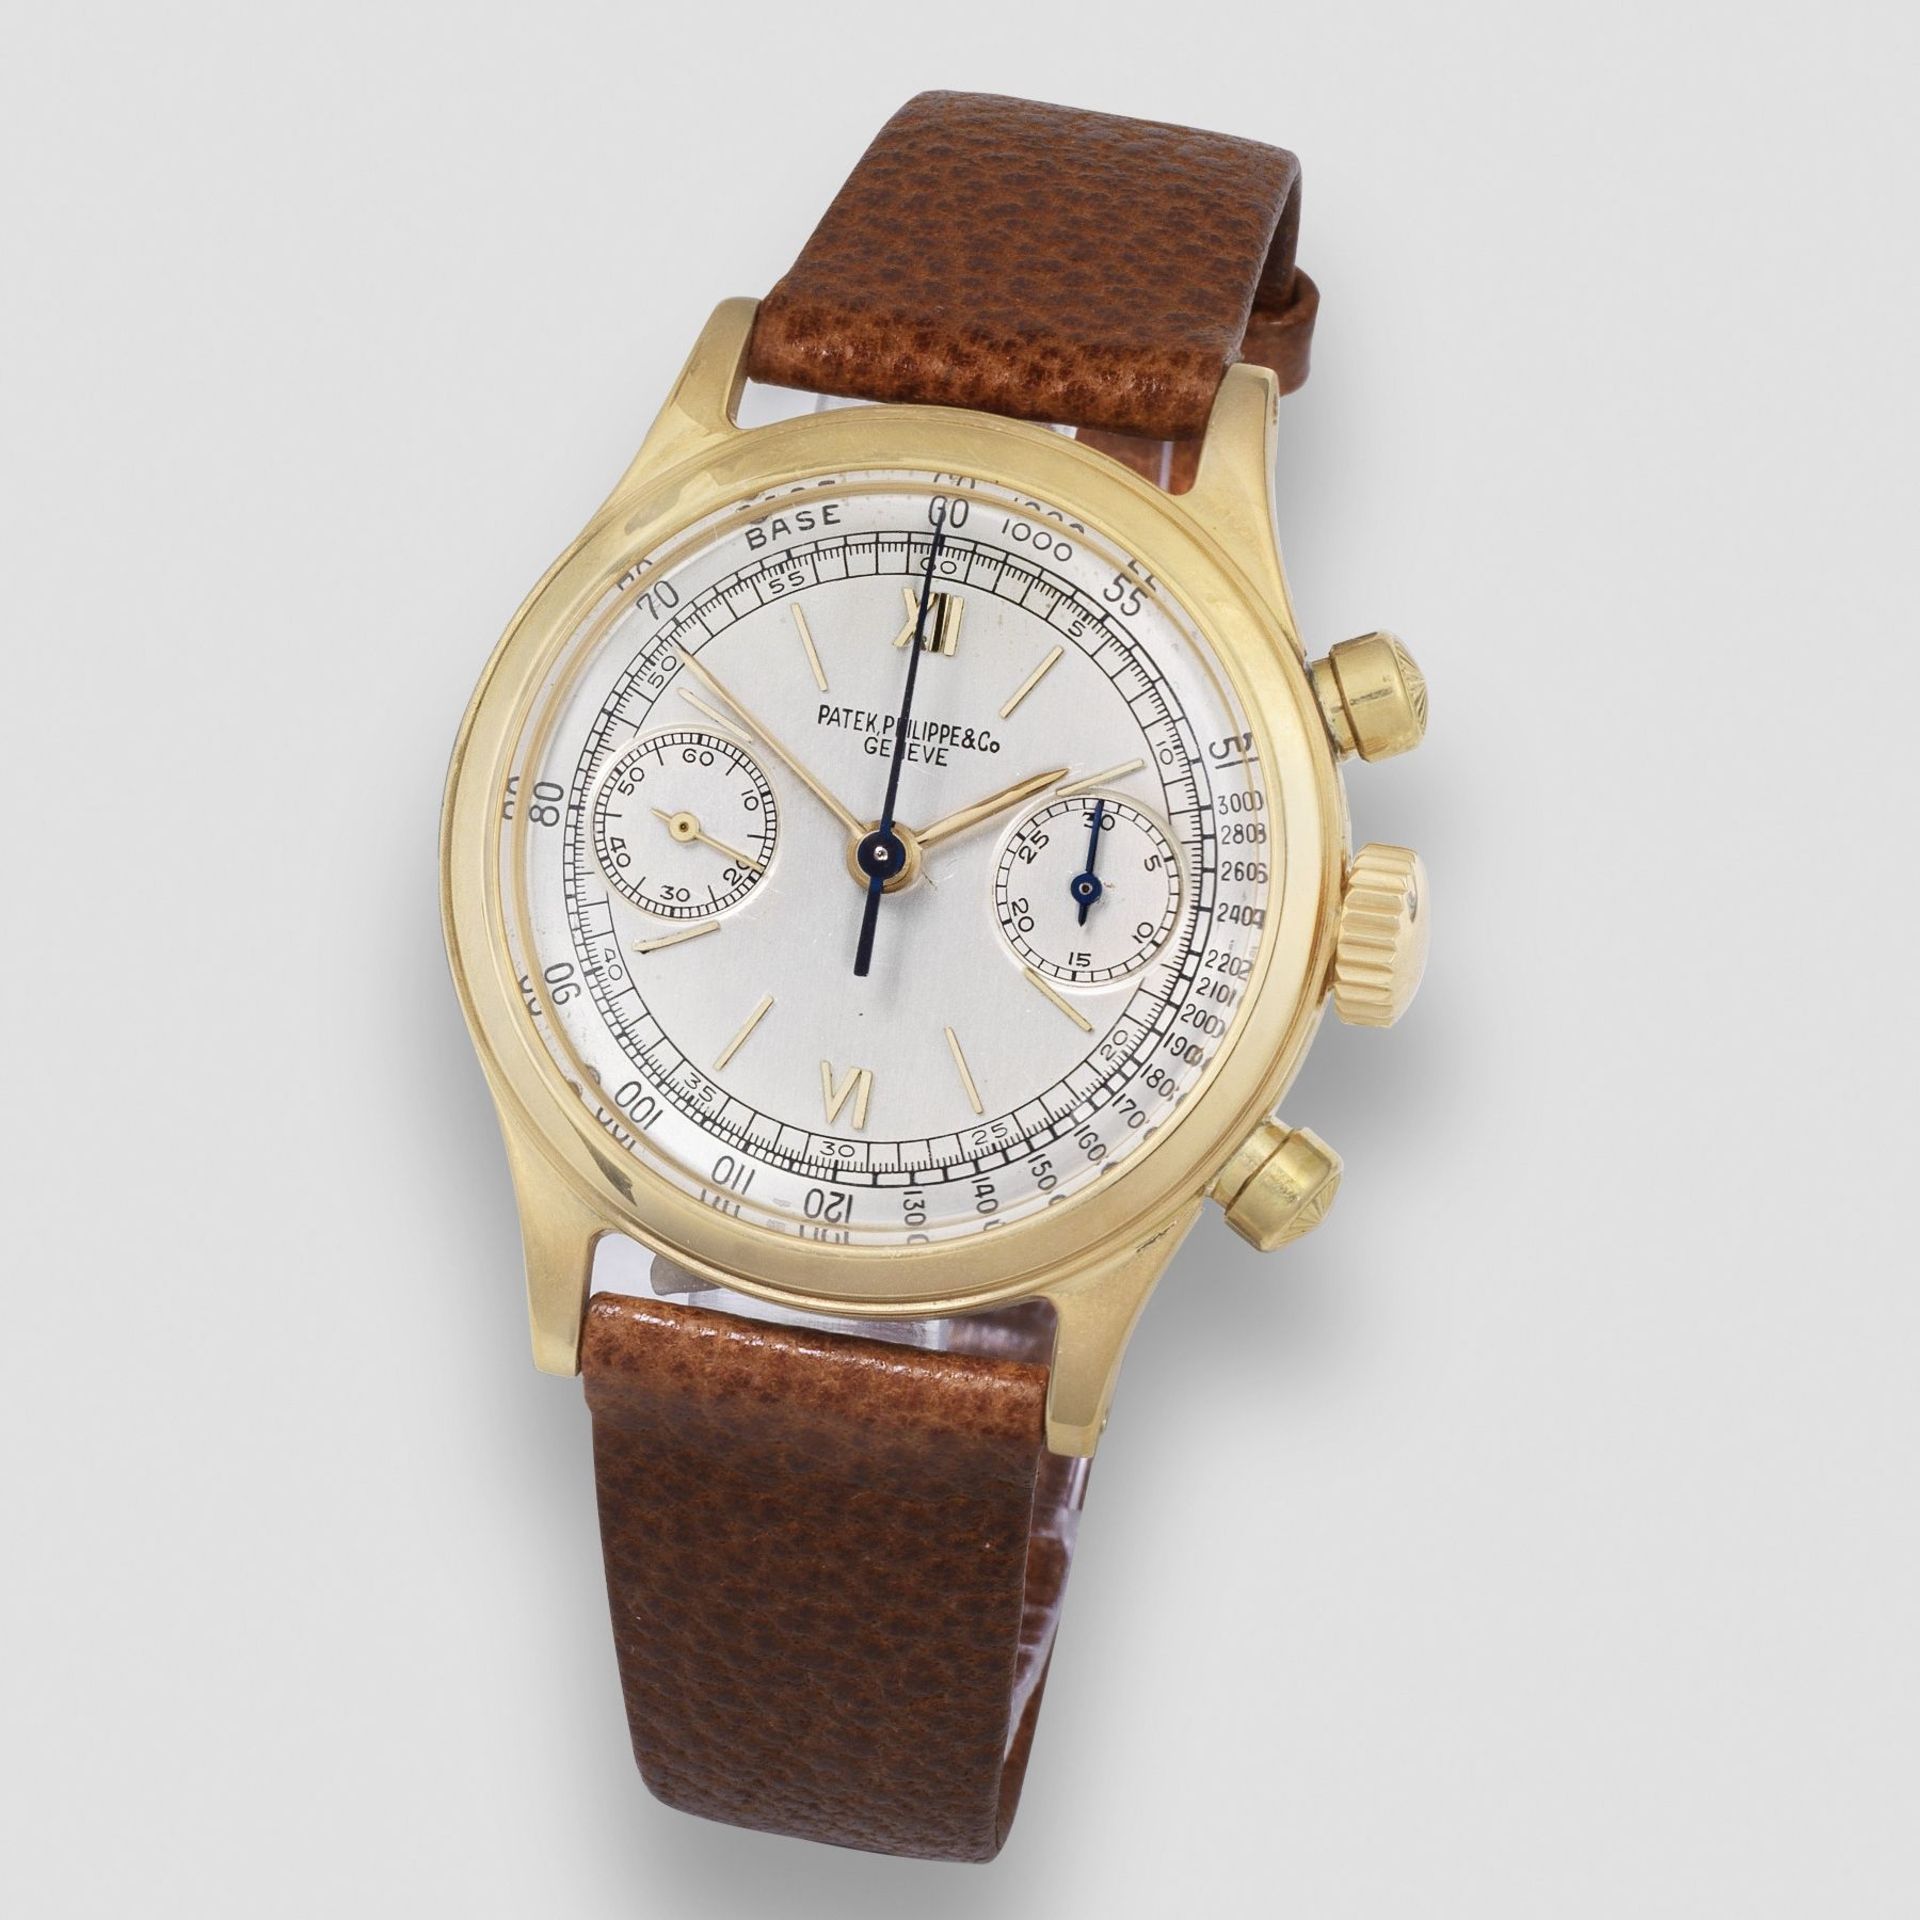 Patek Philippe. A fine and rare 18K gold manual wind chronograph wristwatch with water resistant ...